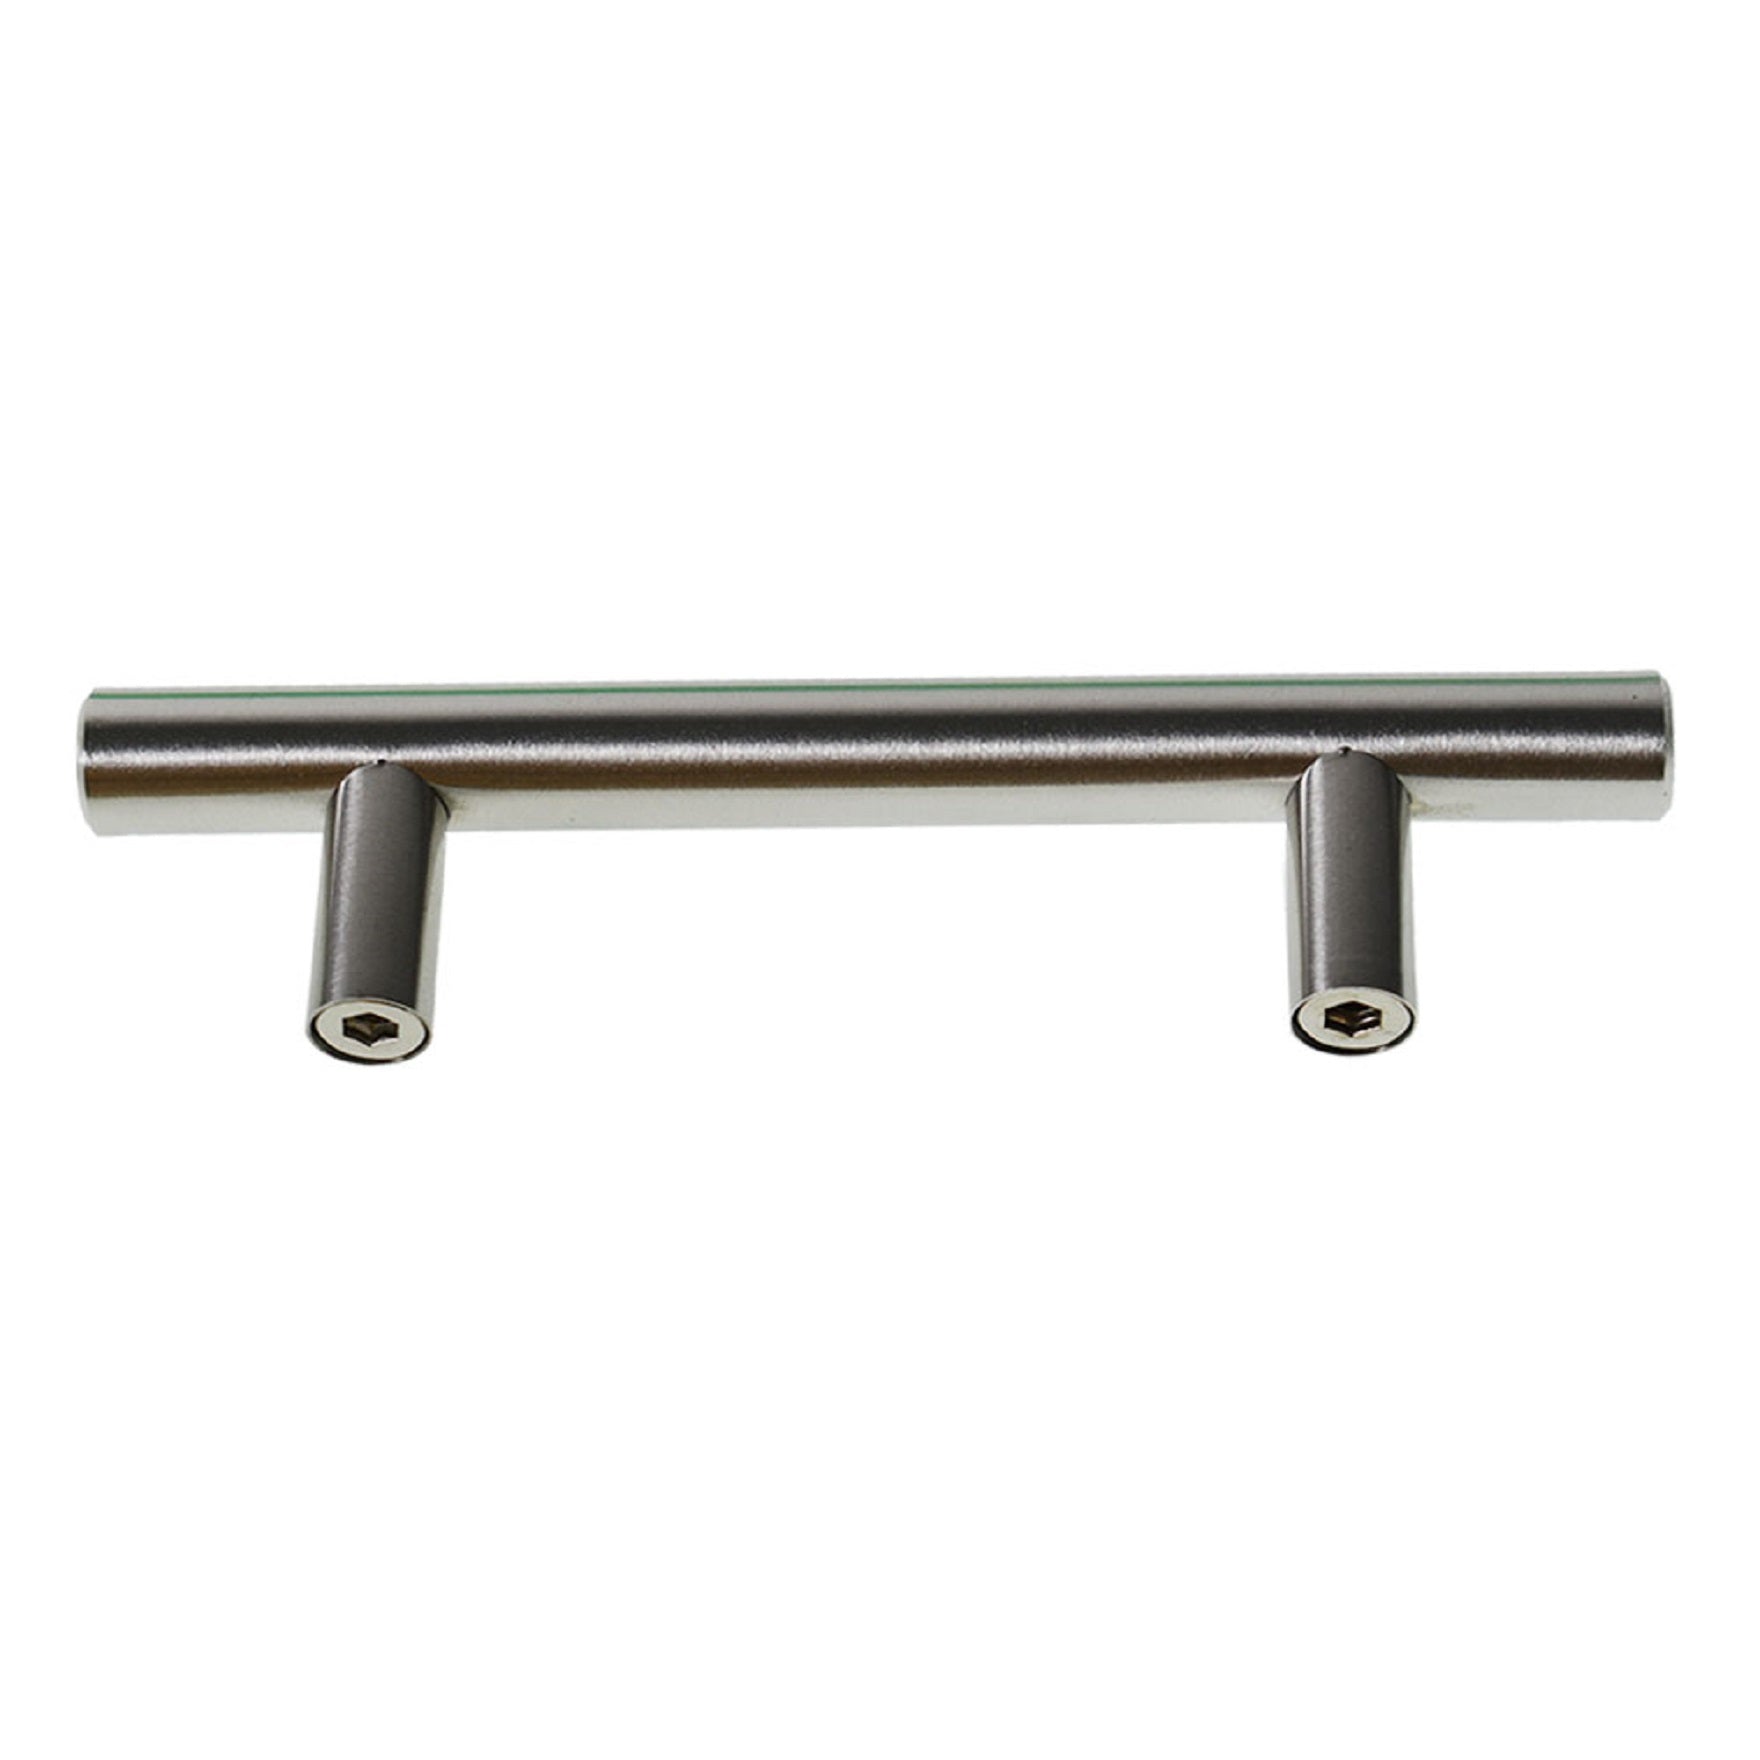 findmall  30 Pack - 5 Inch Cabinet Handle Stainless Steel Drawer Pulls Cabinet Pulls Bar Kitchen Handles 3 Inch Hole Center Strong and Durable FINDMALLPARTS